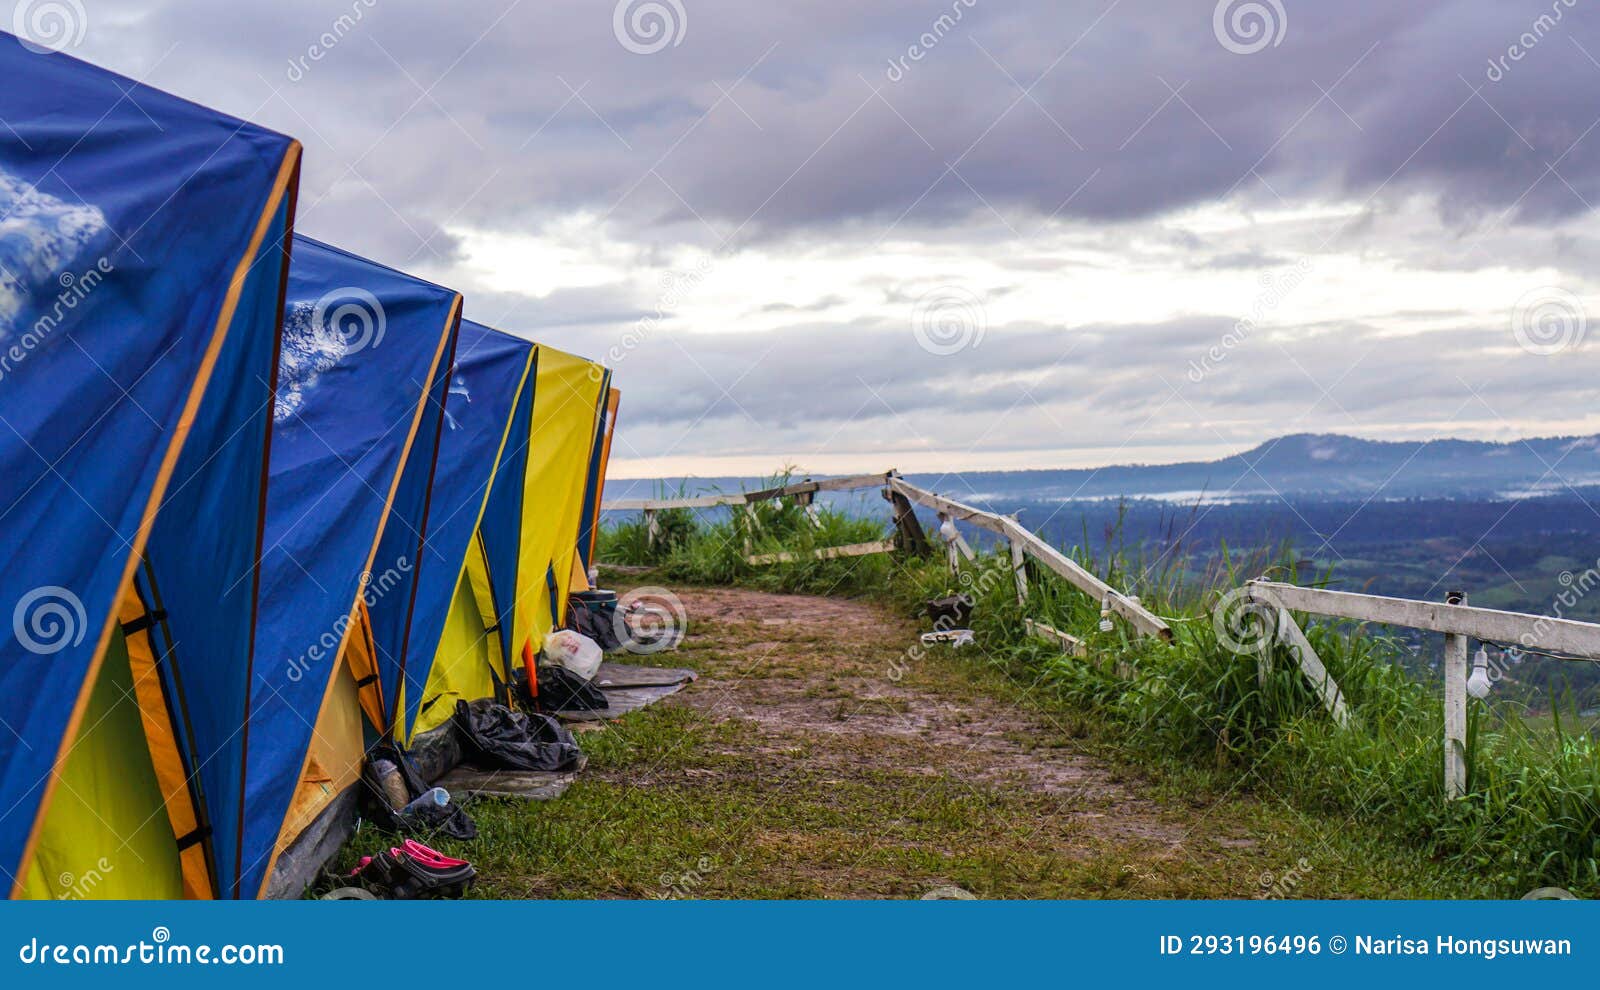 tent in camping with flog and mountain view. camping activities in rain-filled holiday. tent on campsite by the hill in rainy day